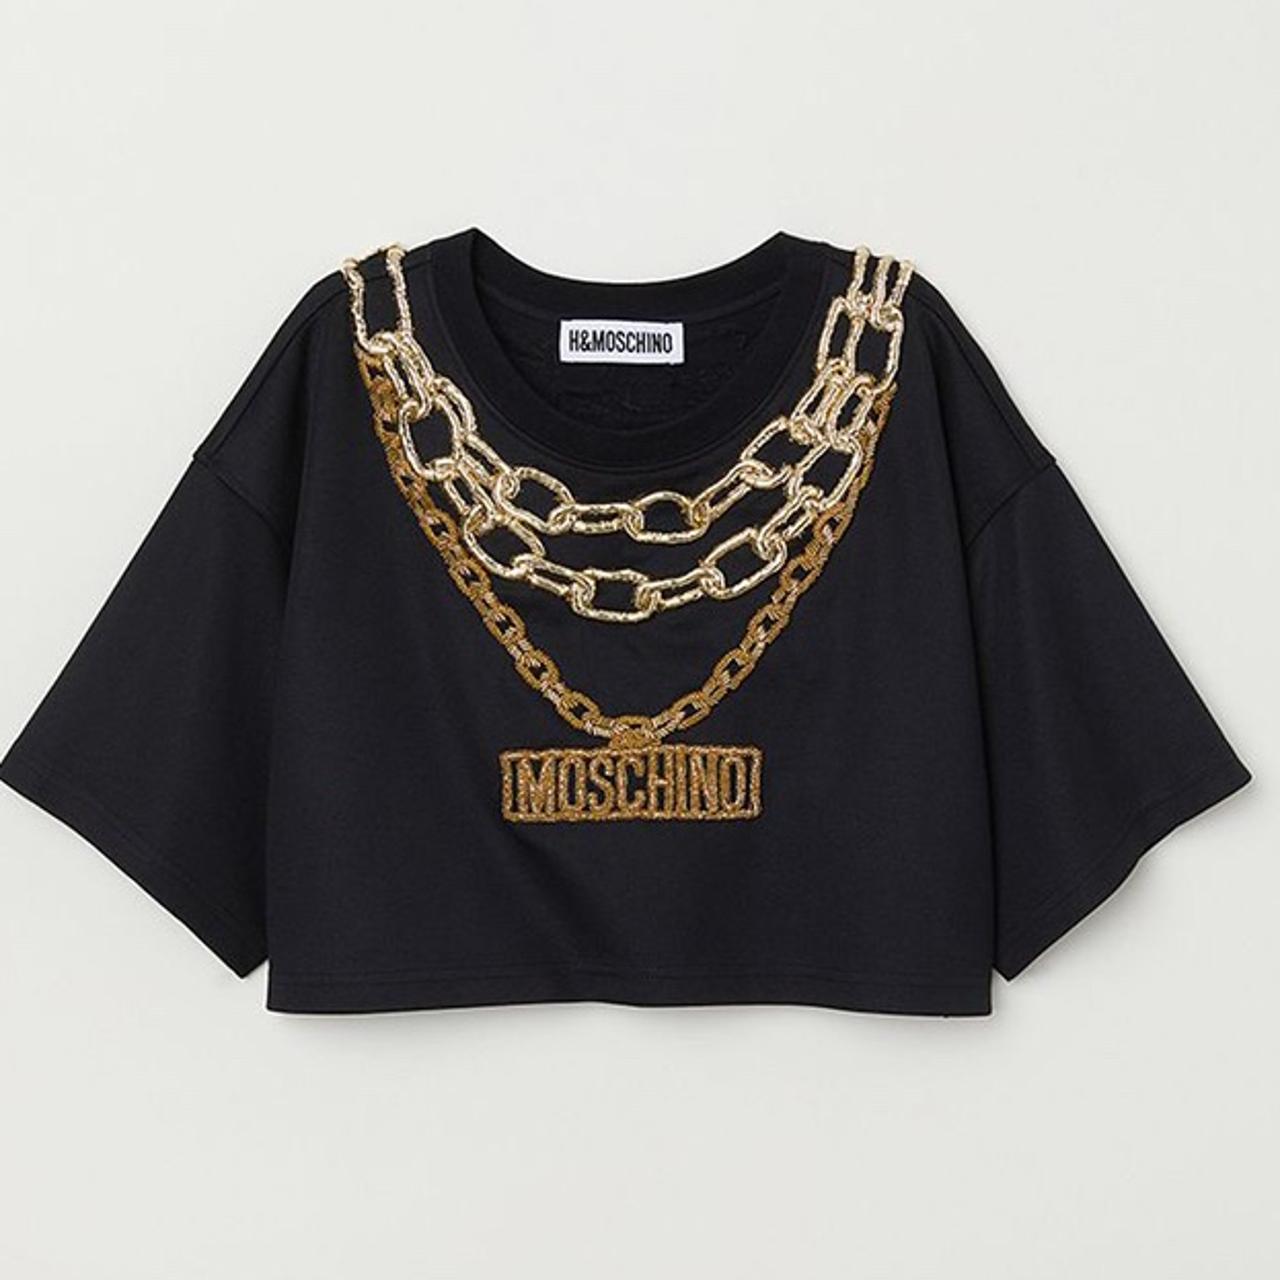 RARE! ✨ H&M x Moschino Crop Top! Sold out from the